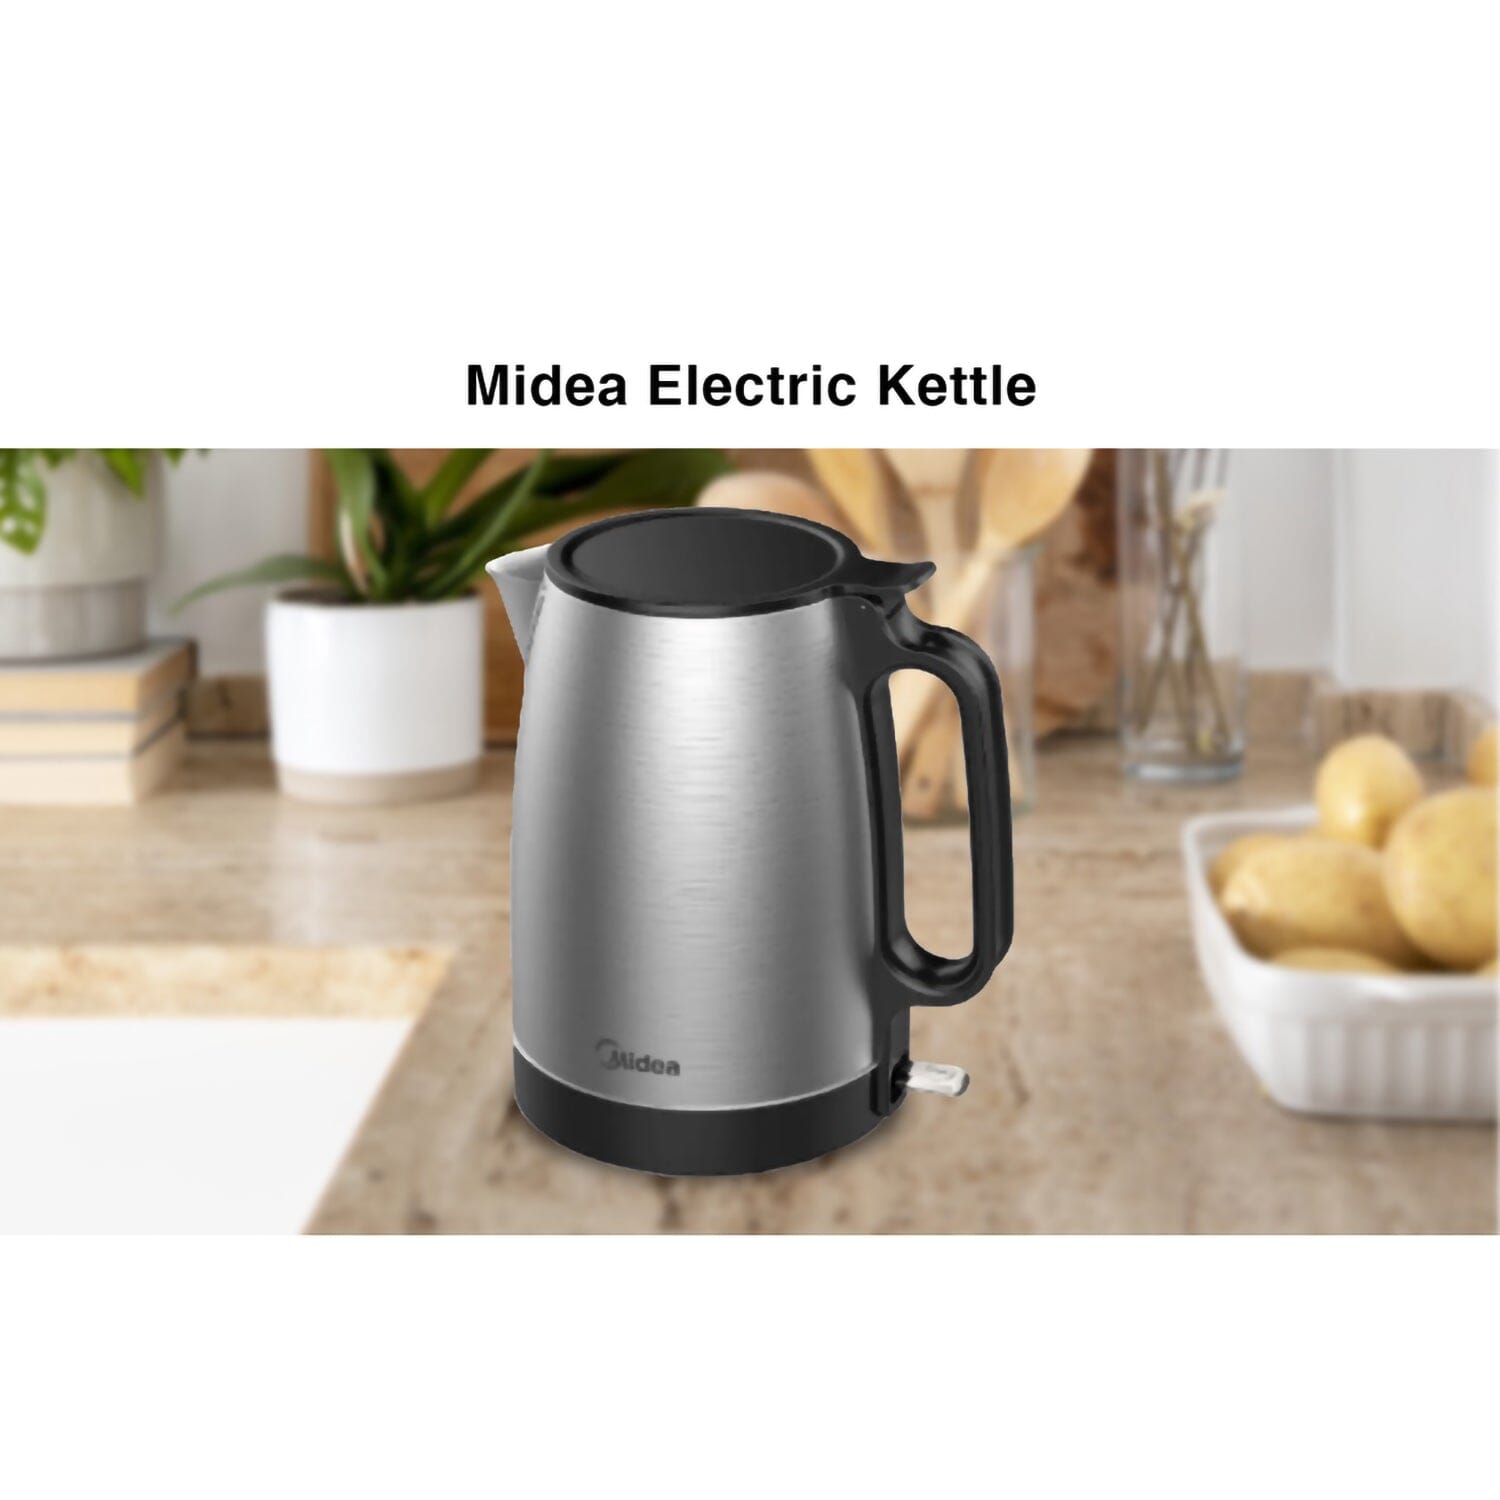 Midea 1.7L Fast Boiling Electric Kettle,Stainless Steel Grey,MK-1703M ONE2WORLD 